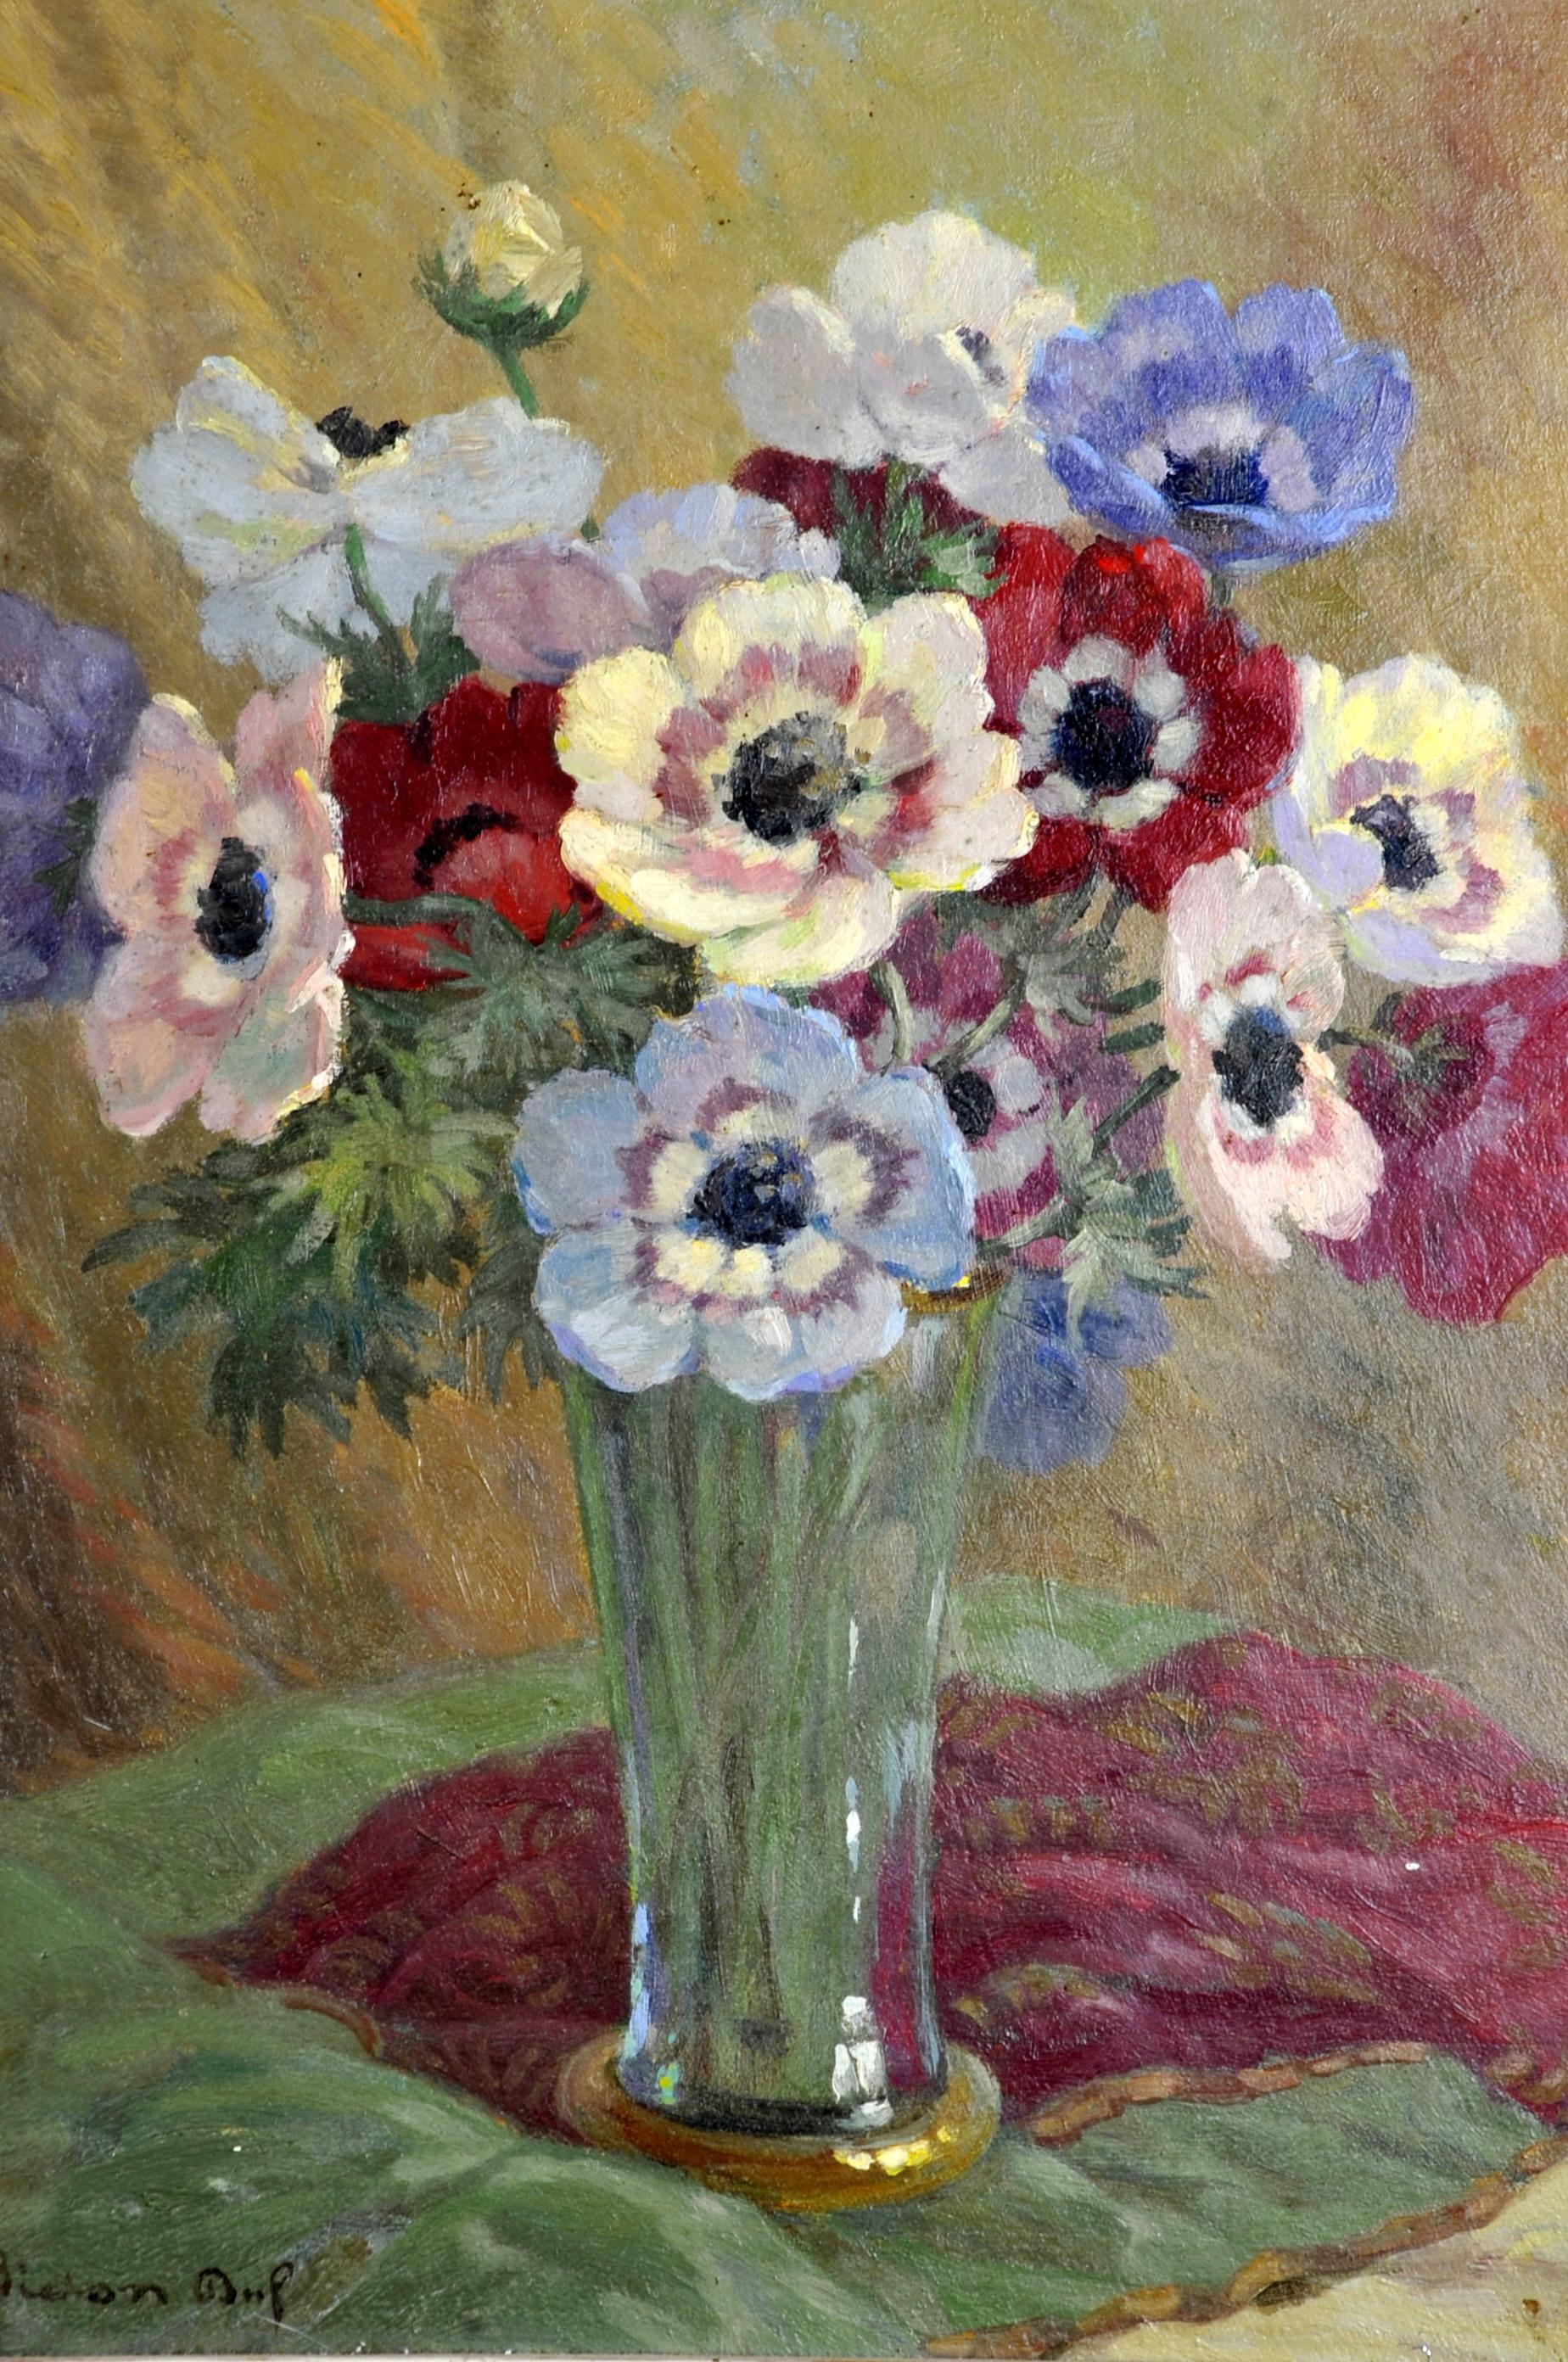 Oil on panel representing a bouquet of flowers in a crystal vase with a golden frame, the whole arranged in a cozy decor of fabrics of different colors.

Beautiful soft and nuanced colors in the spirit of the style of the 1930s.

In its original